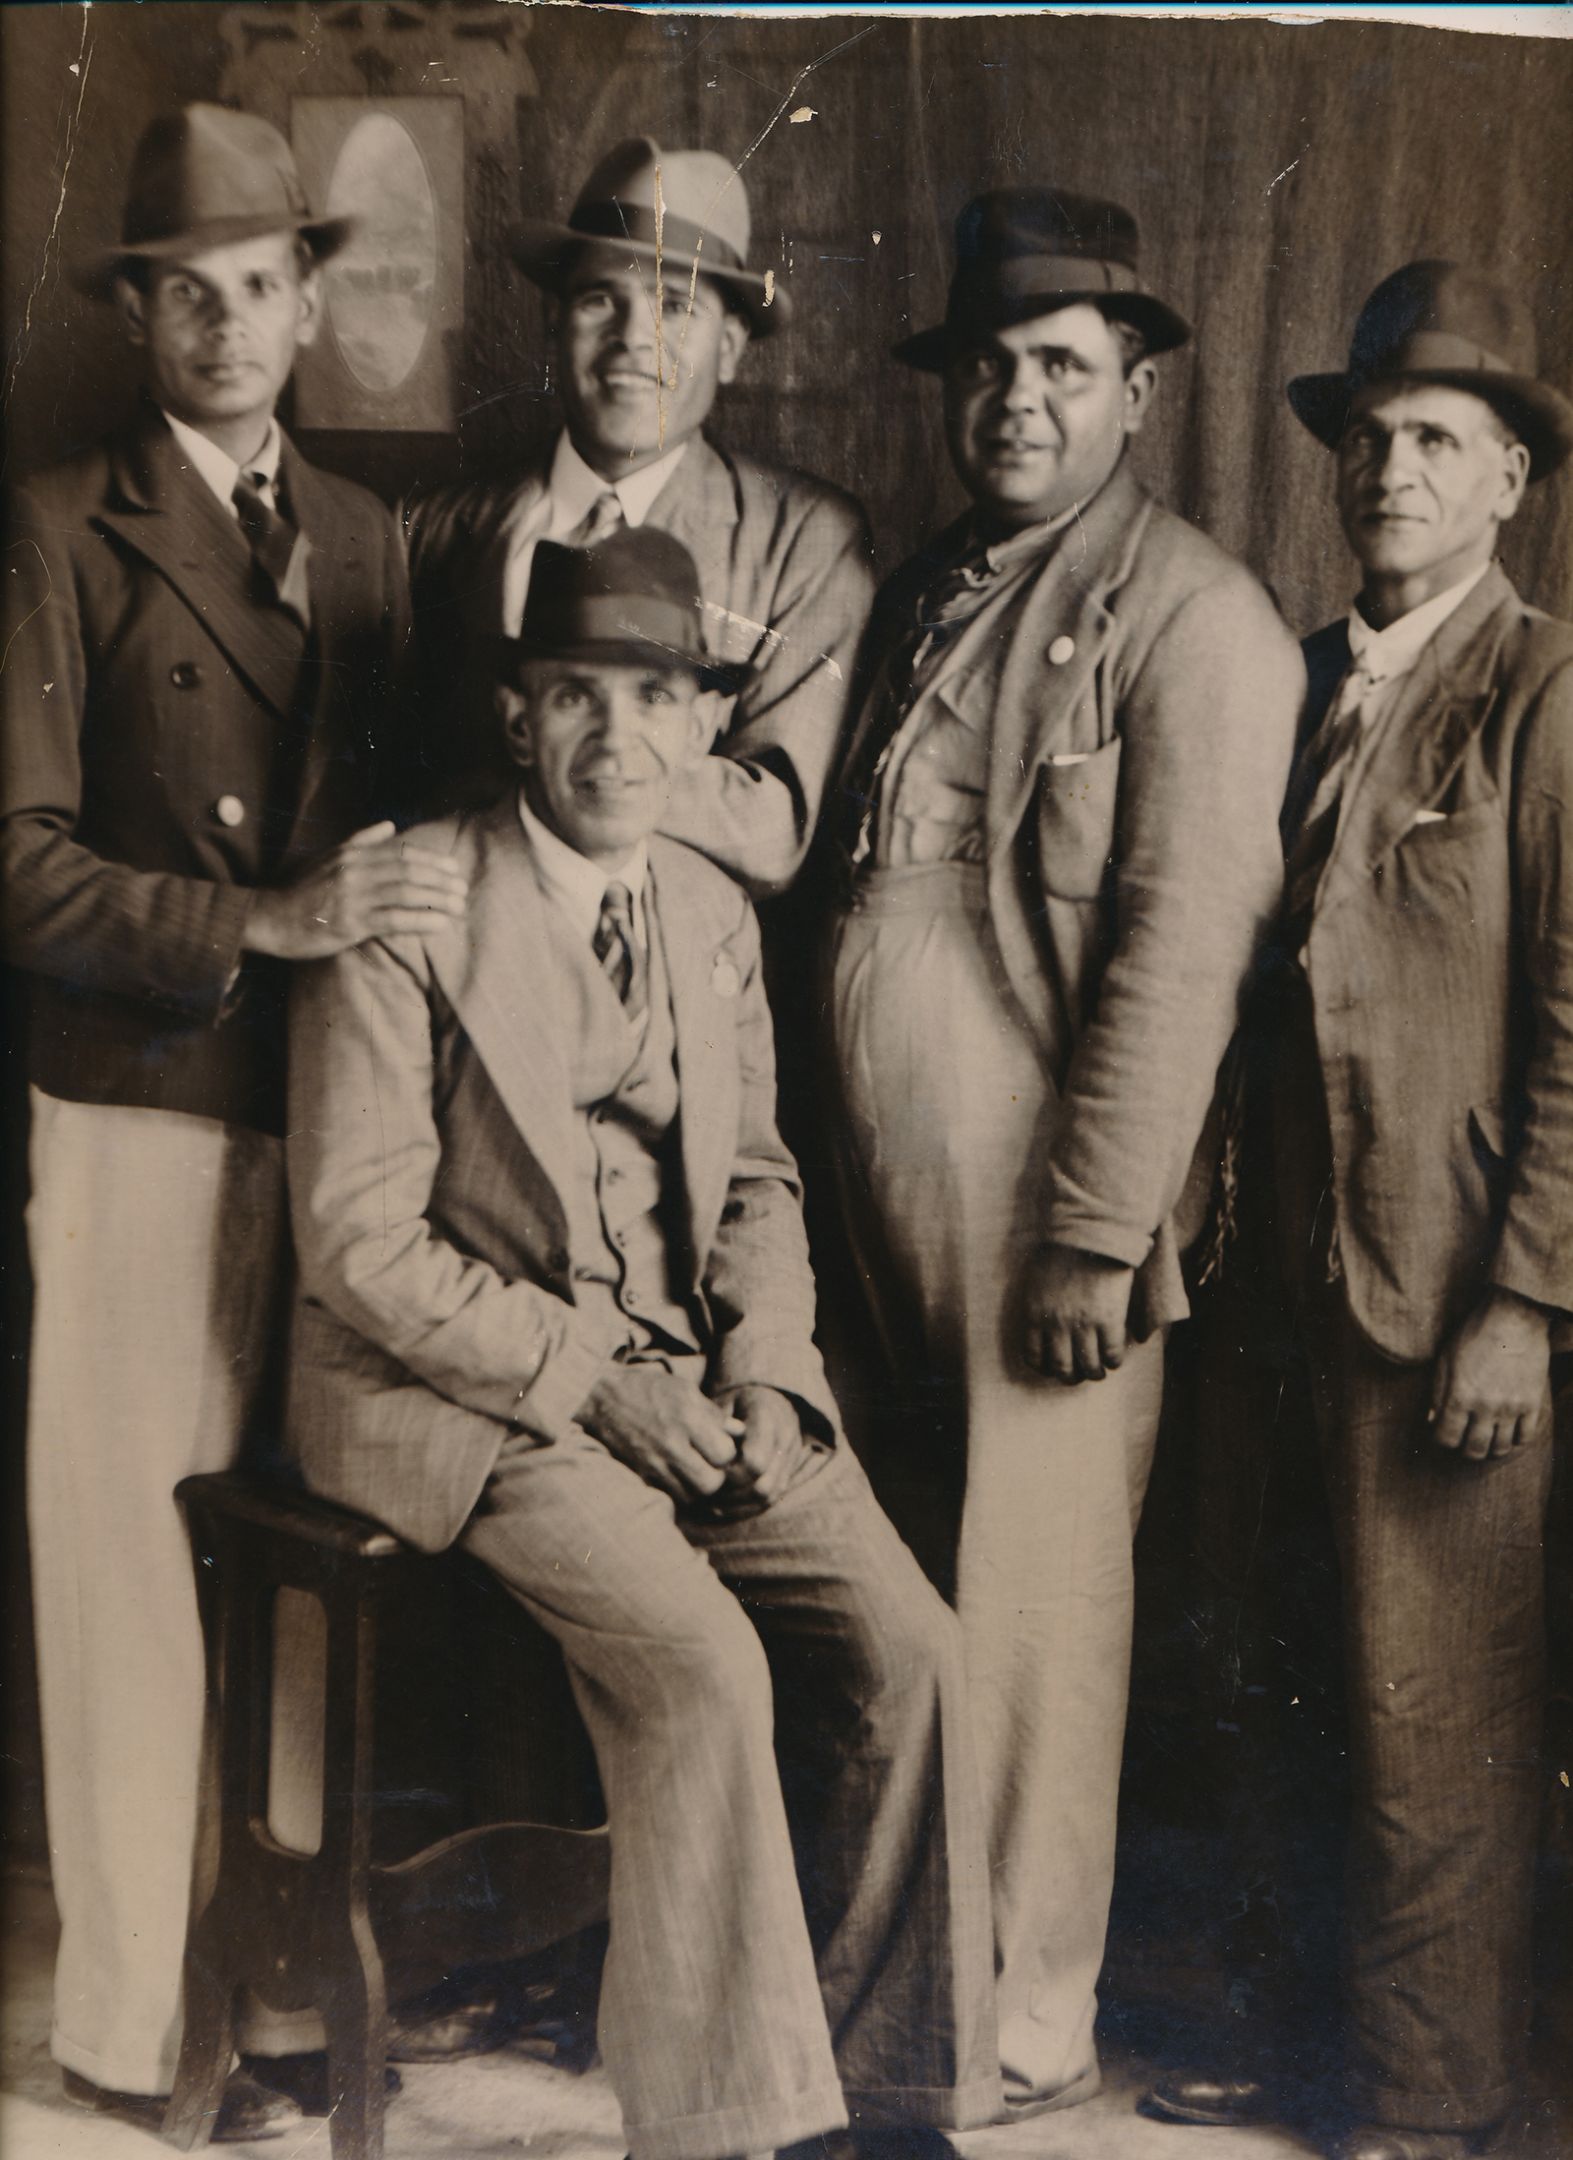 Gathering of five Ngarrindjeri veterans from the First World War and the Second World War